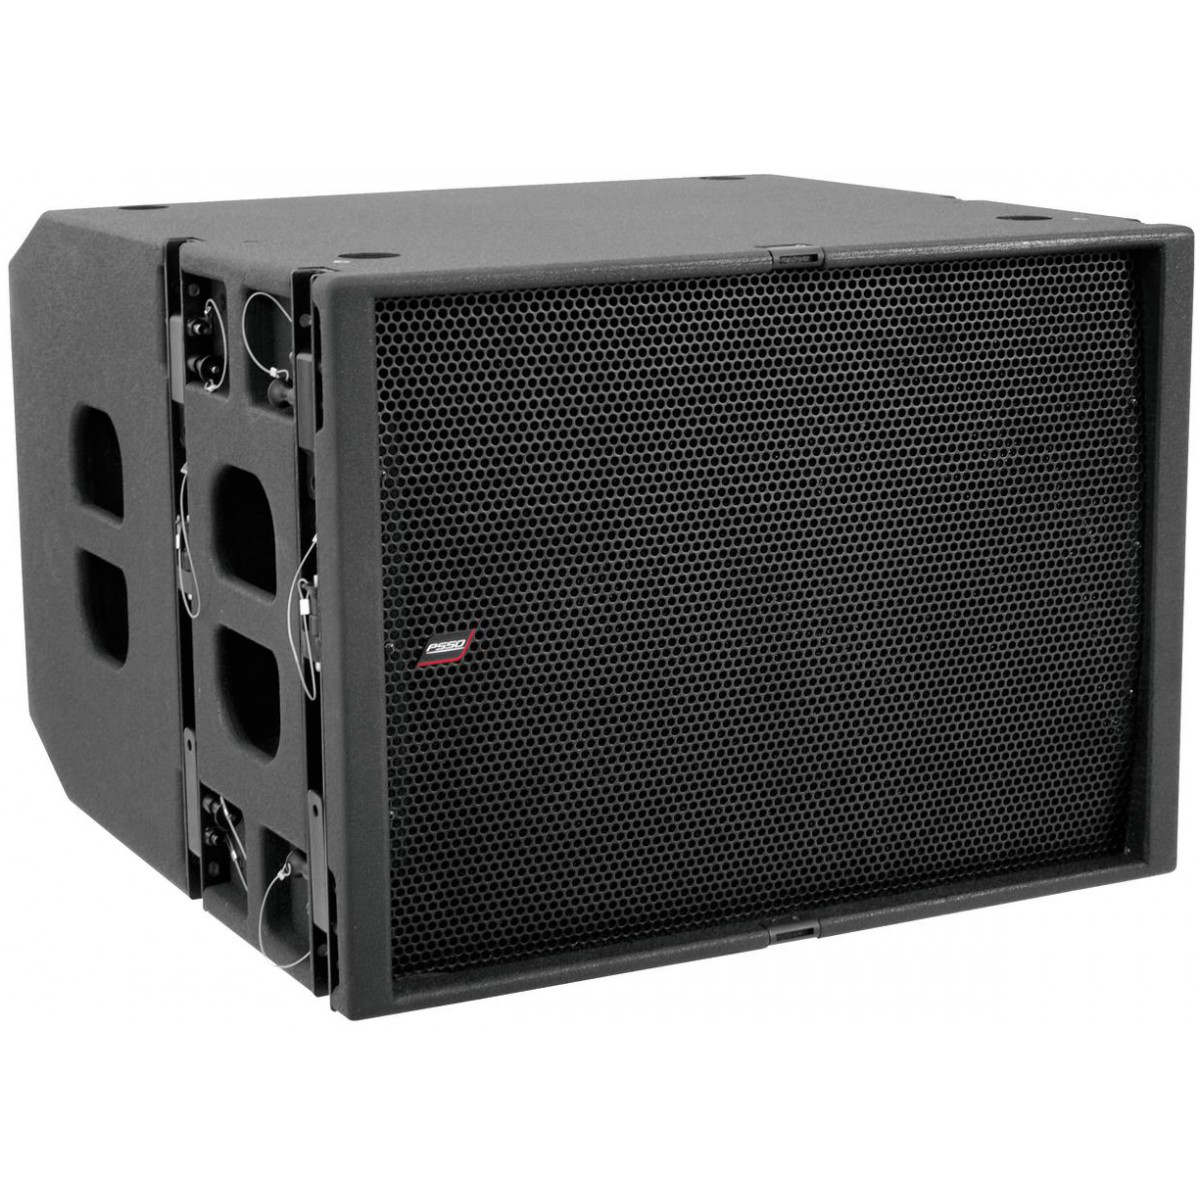 15" subwoofer, 500W RMS